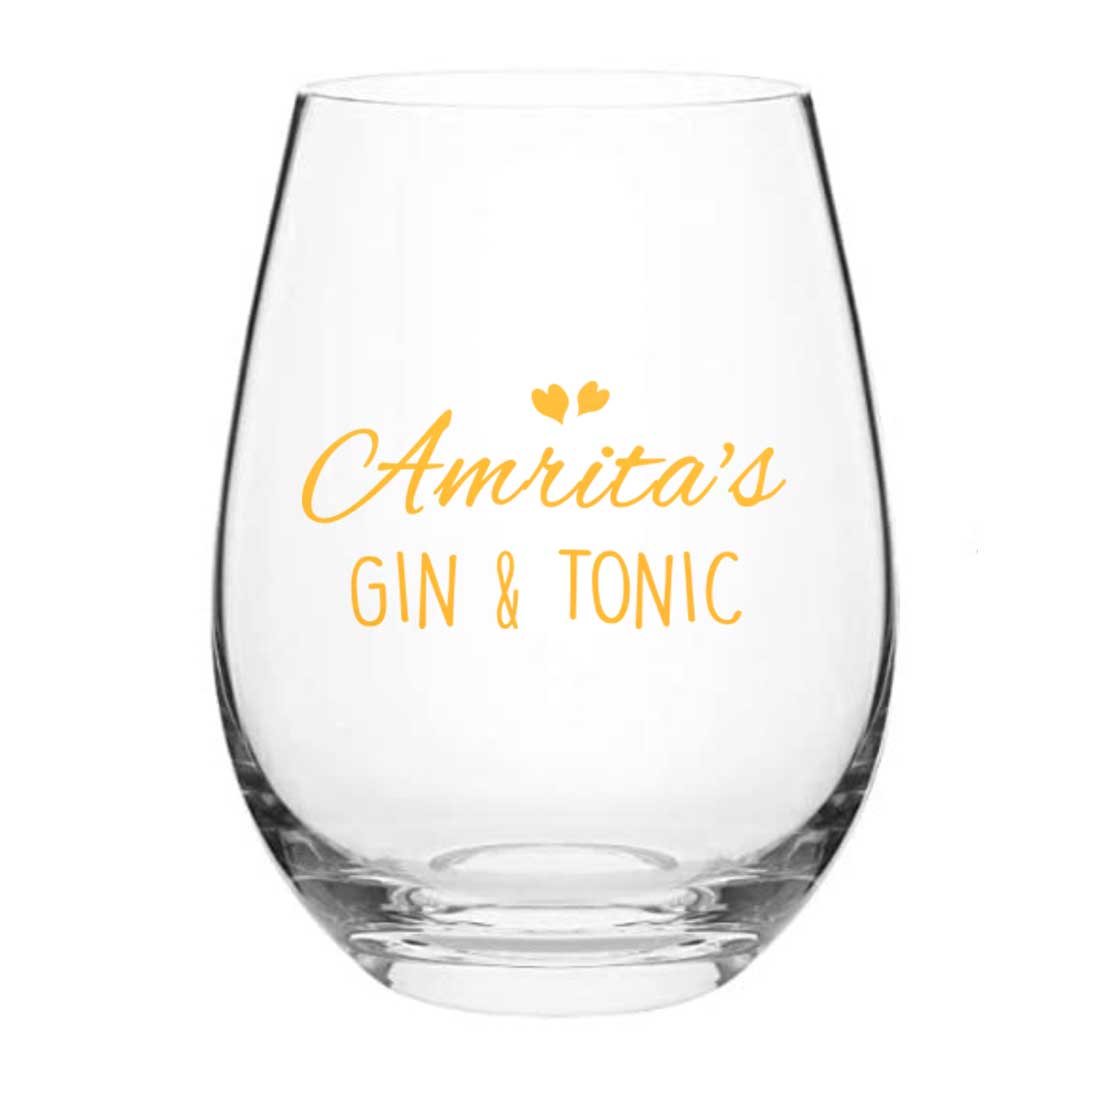 Customized Gin And Tonic Glasses Personalized Drink Glass - Add Name